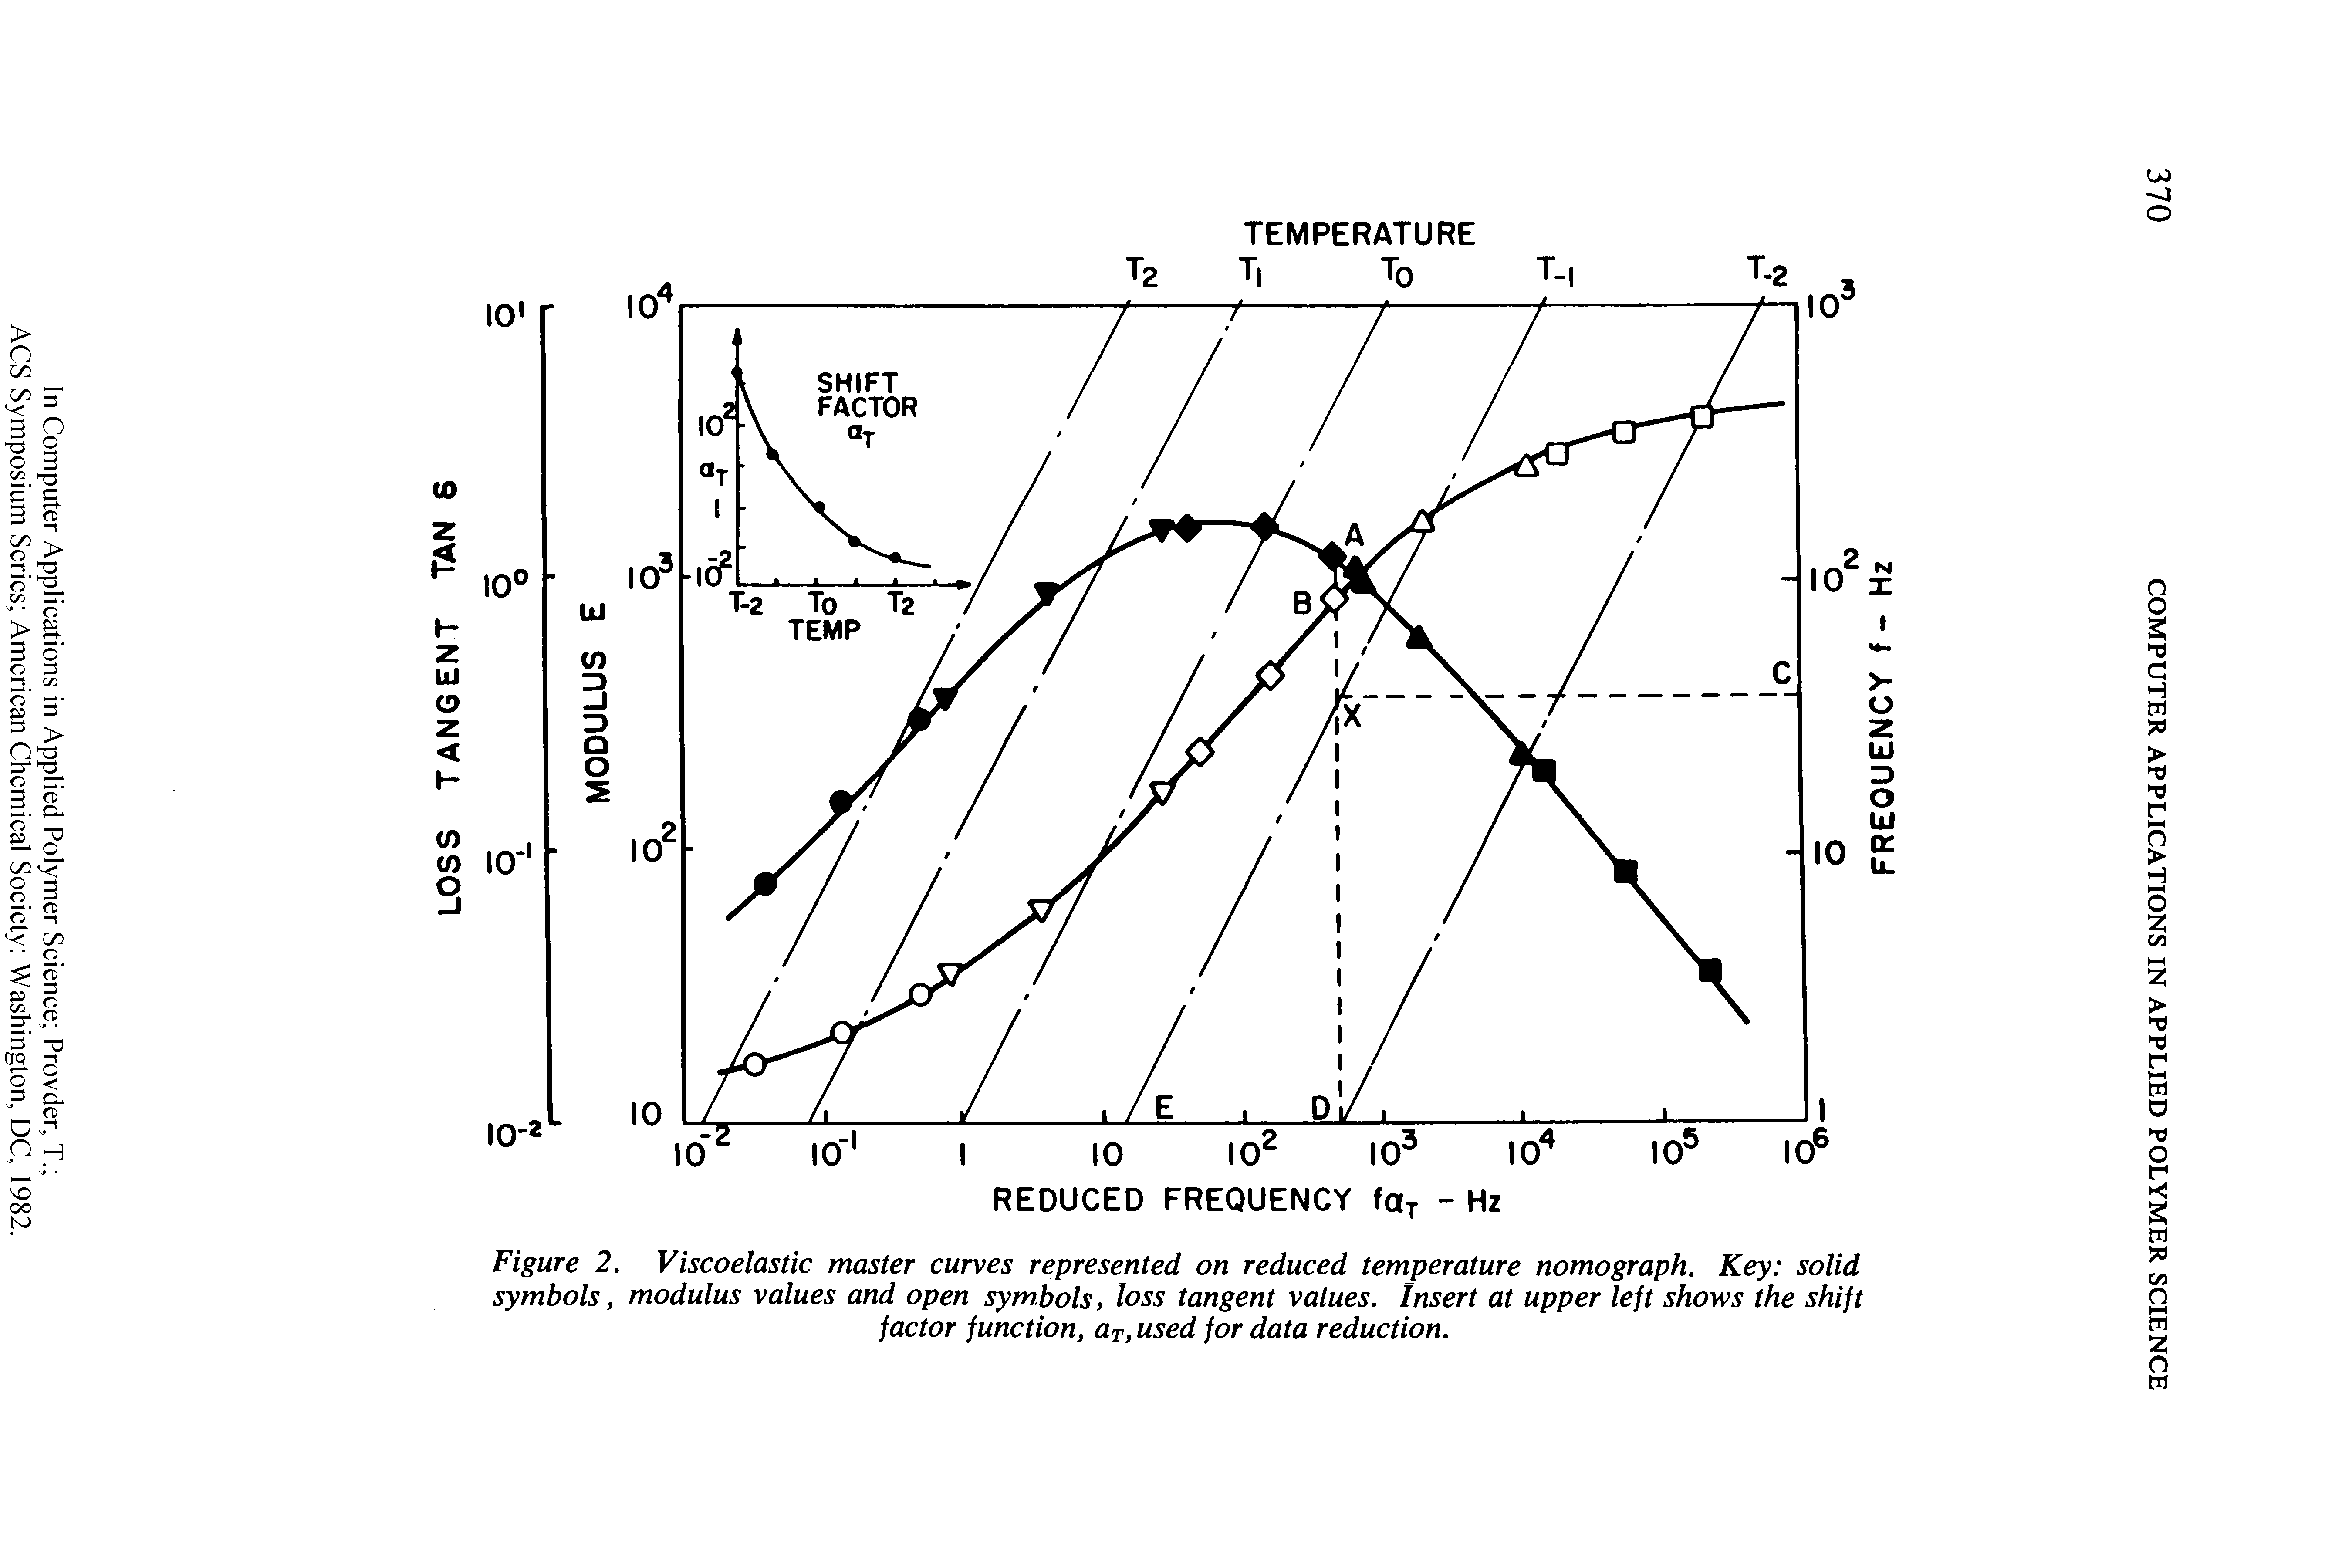 Figure 2. Viscoelastic master curves represented on reduced temperature nomograph. Key solid symbols, modulus values and open symbols, loss tangent values. Insert at upper left shows the shift factor function, aT, used for data reduction.